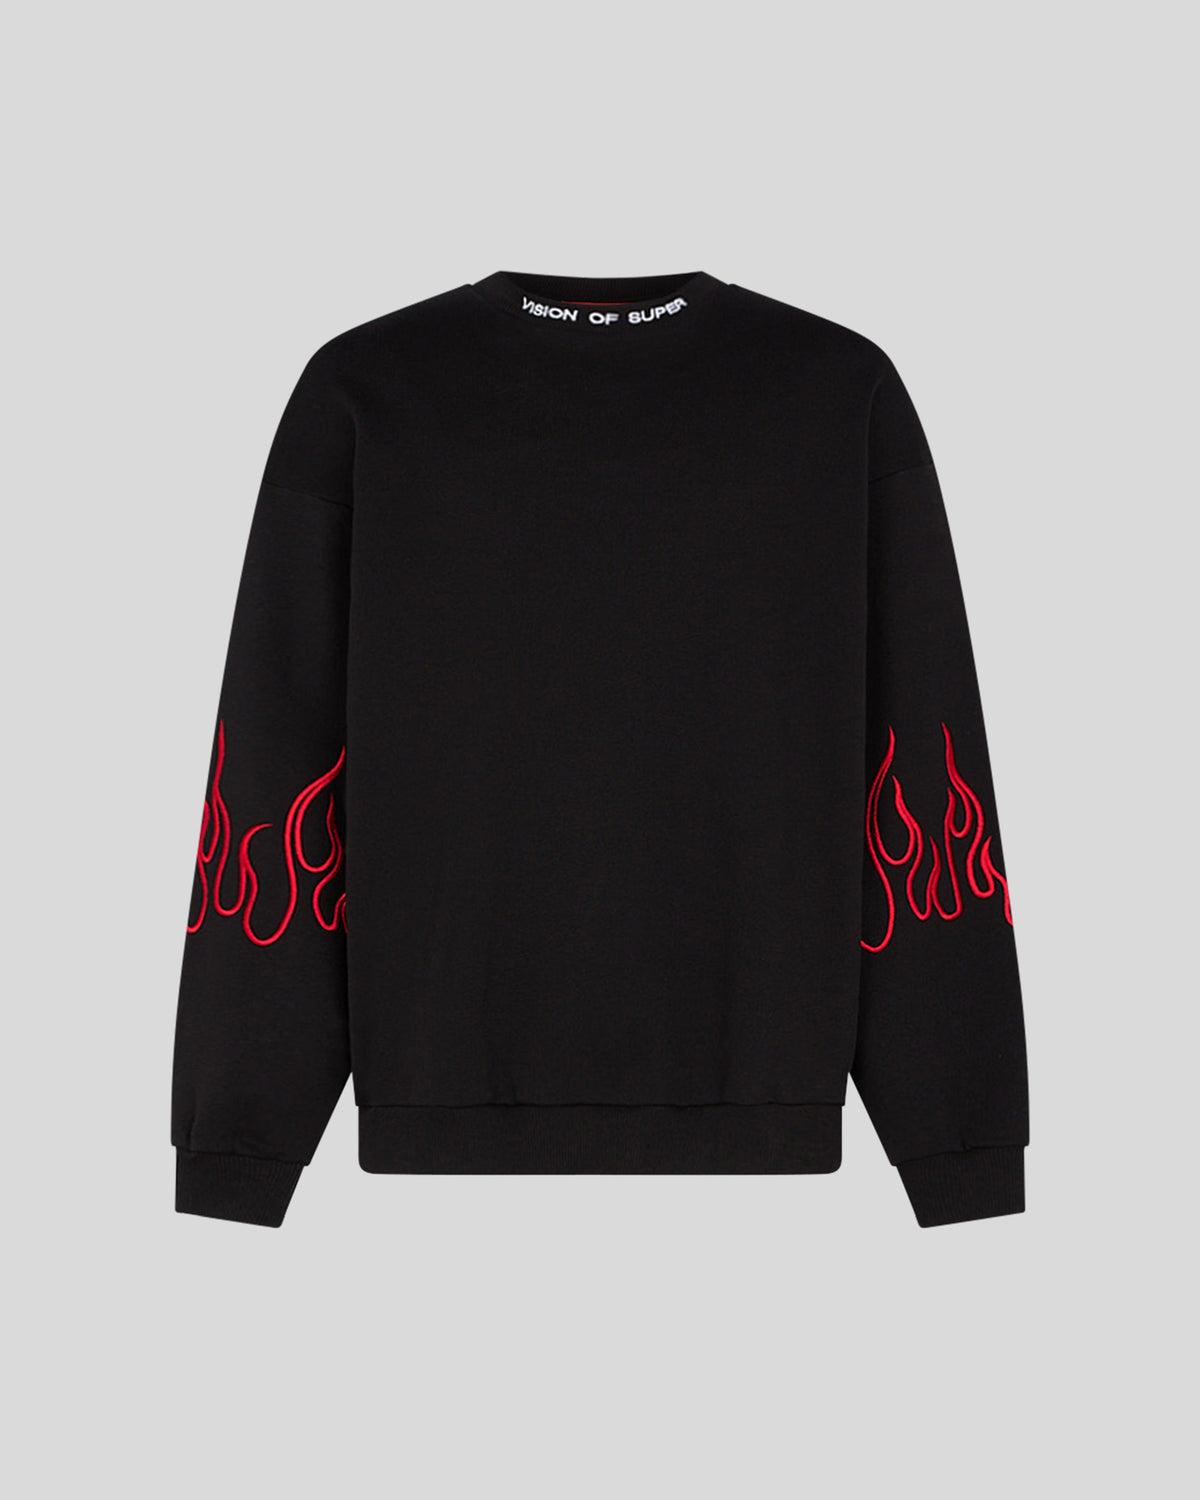 VISION OF SUPER BLACK CREWNECK WITH RED EMBROIDERED FLAMES